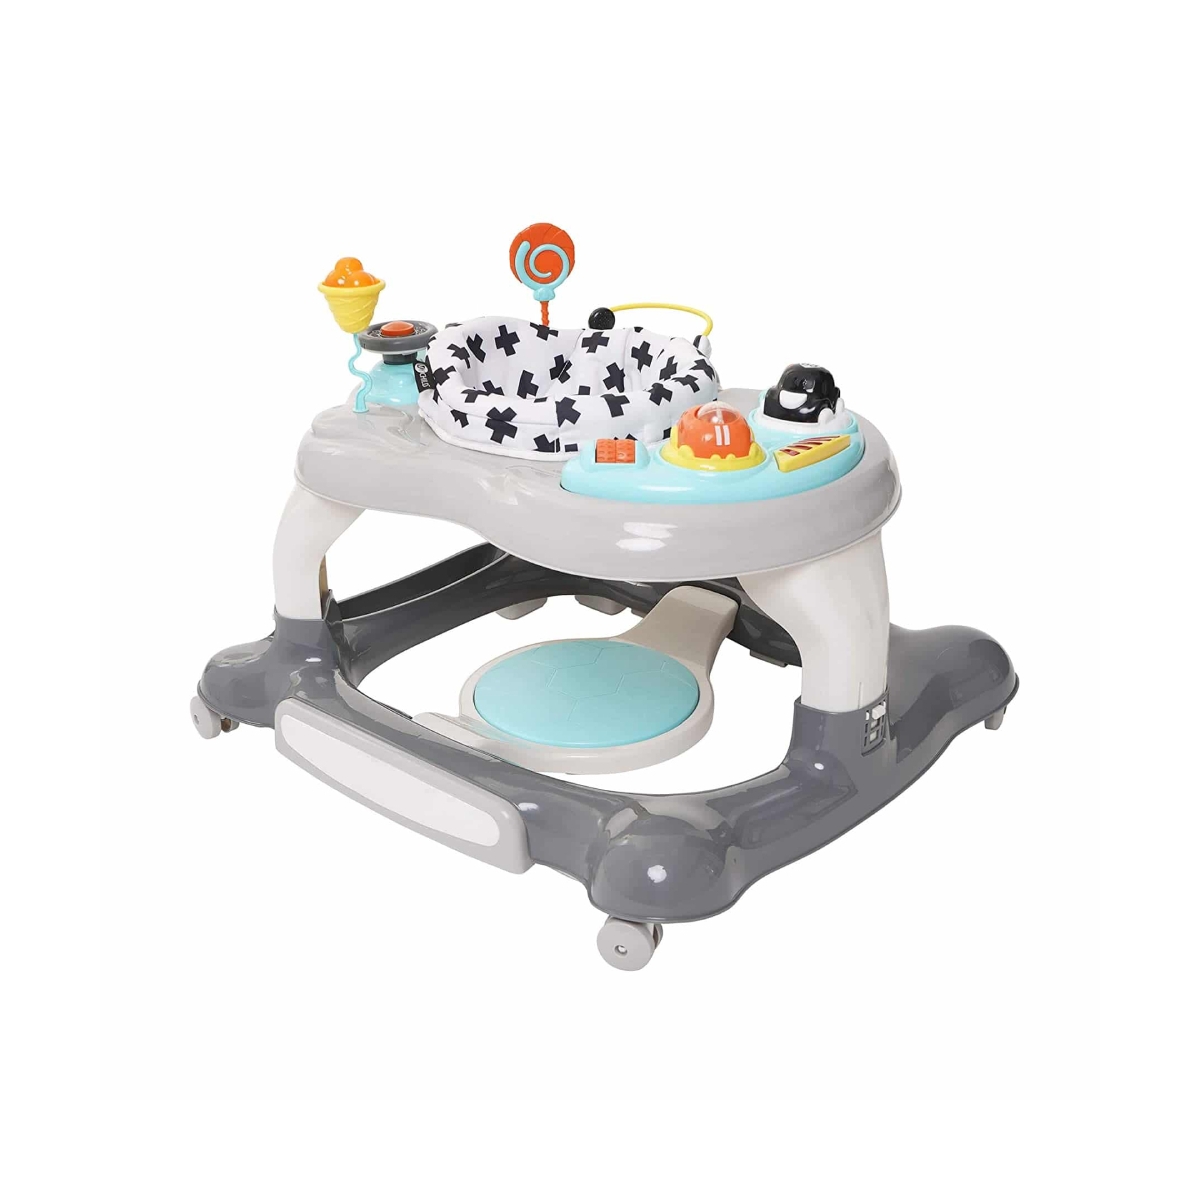 My Child Roundabout 4in1 Activity Walker